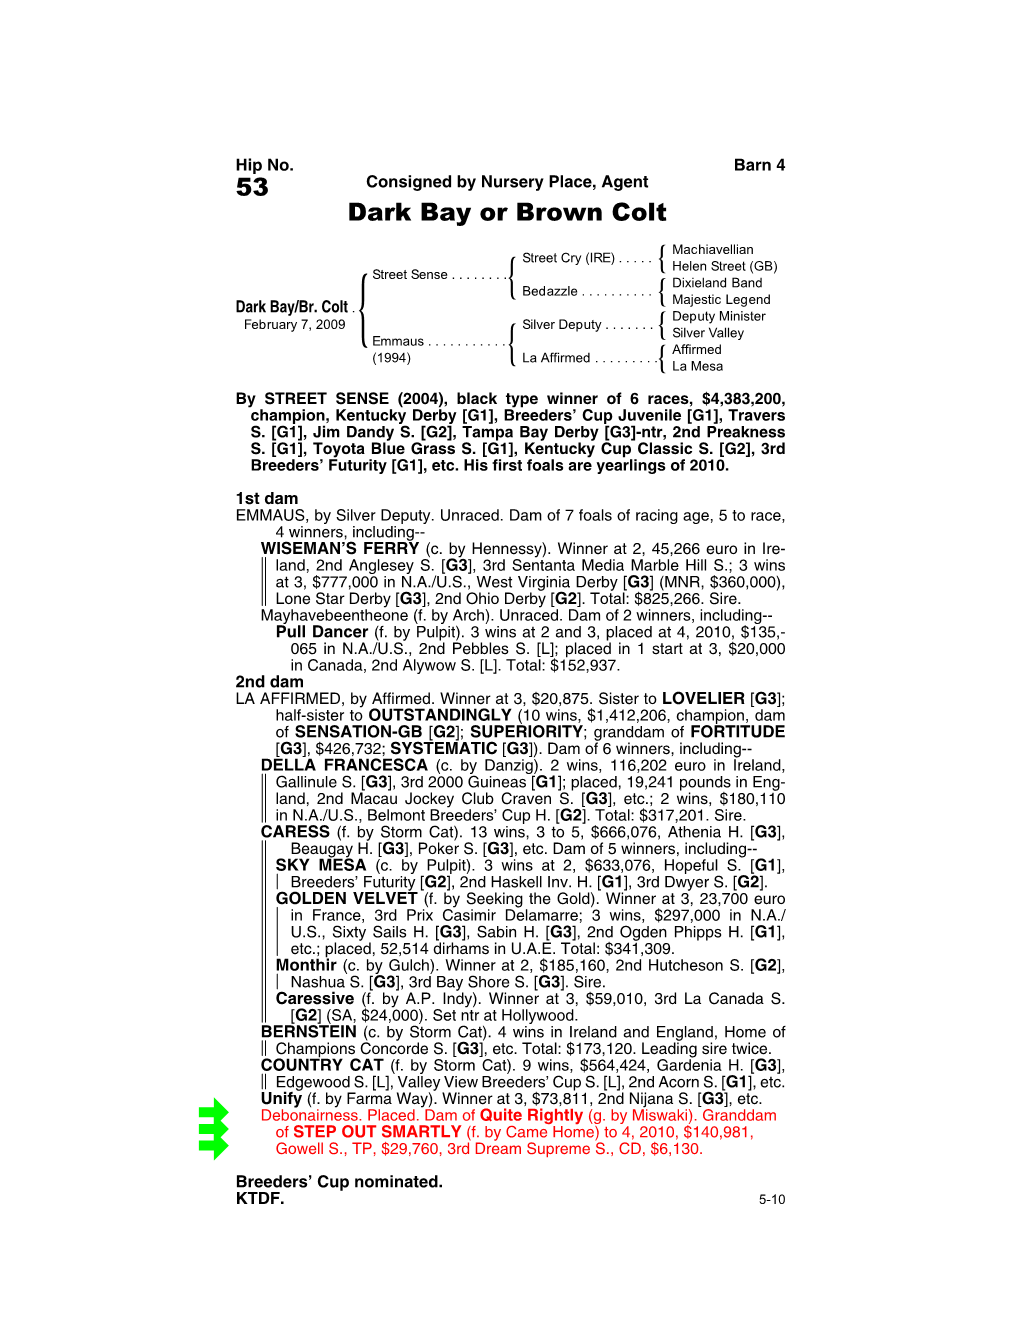 53 Consigned by Nursery Place, Agent Dark Bay Or Brown Colt